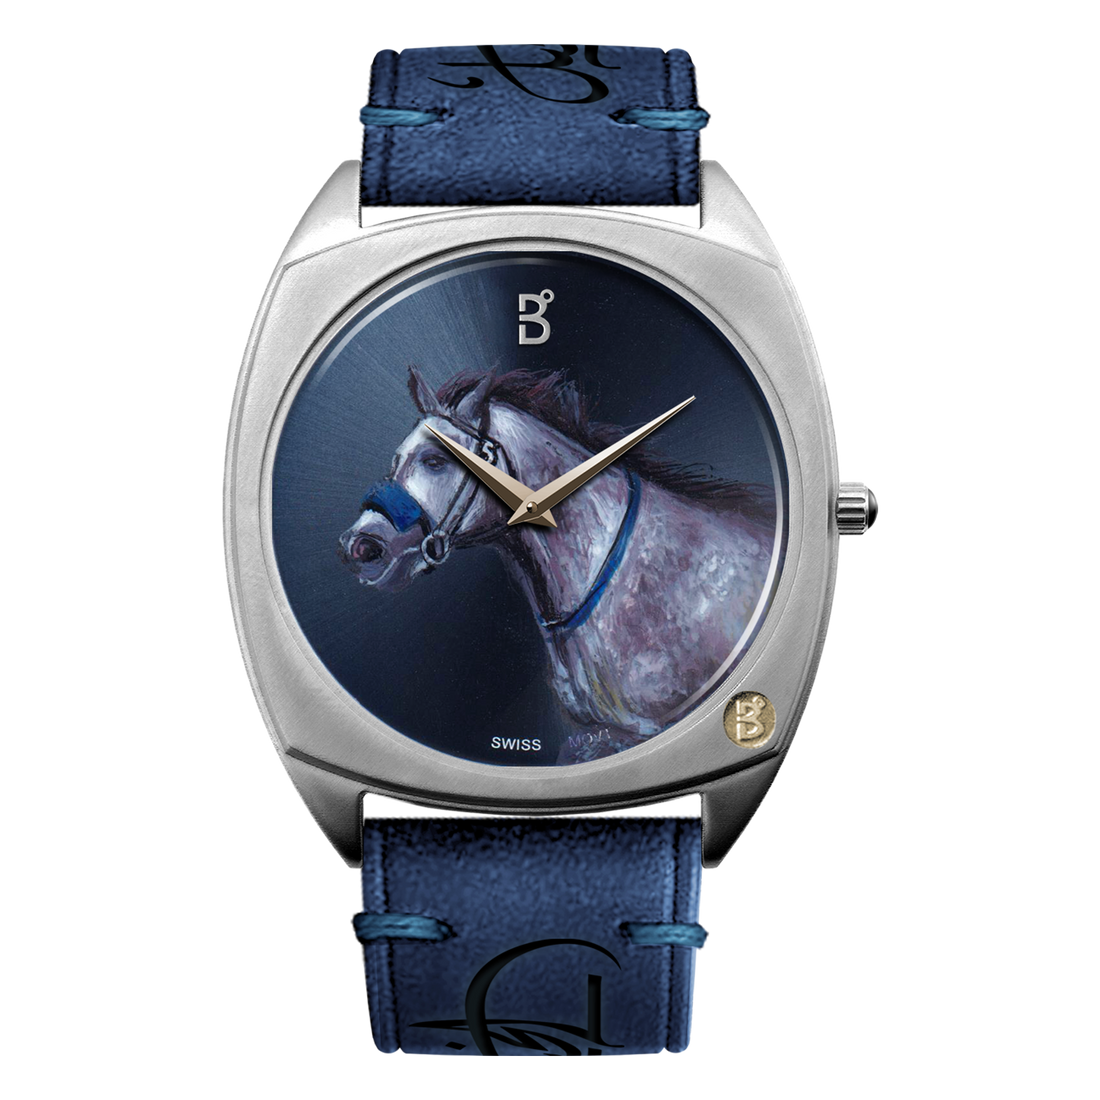 B360-Watches-We have created over 70 hand painted watches, one for each horse. Each watch comes with a signed certificate by our artists and marked as 1 out of 1. Check out our Arabian Horses collections.  